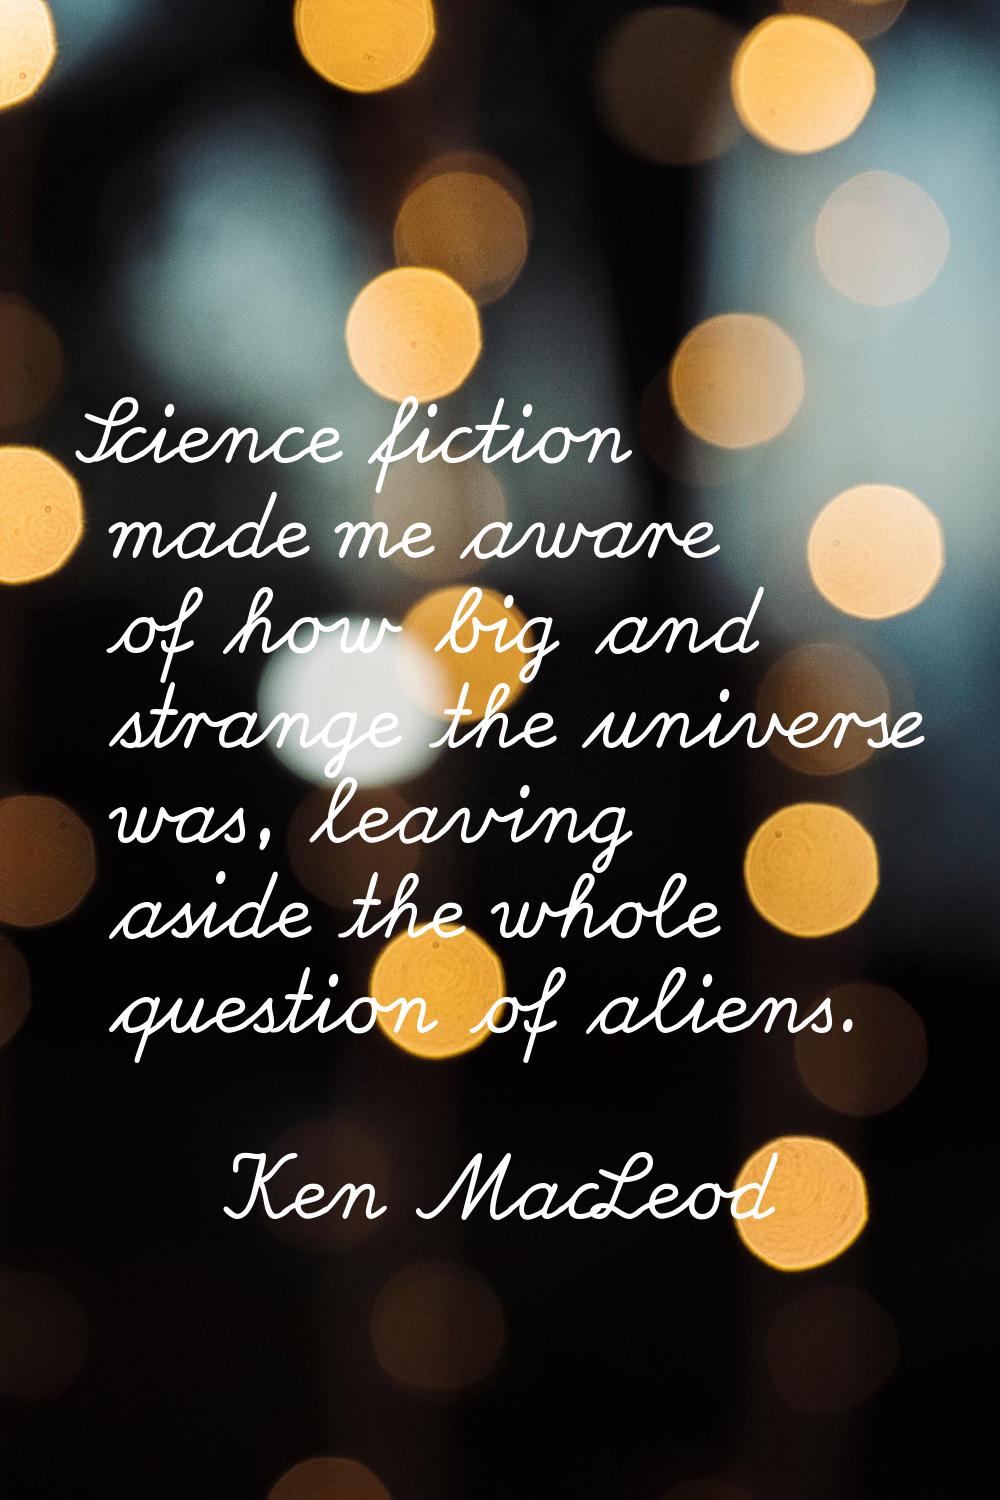 Science fiction made me aware of how big and strange the universe was, leaving aside the whole ques